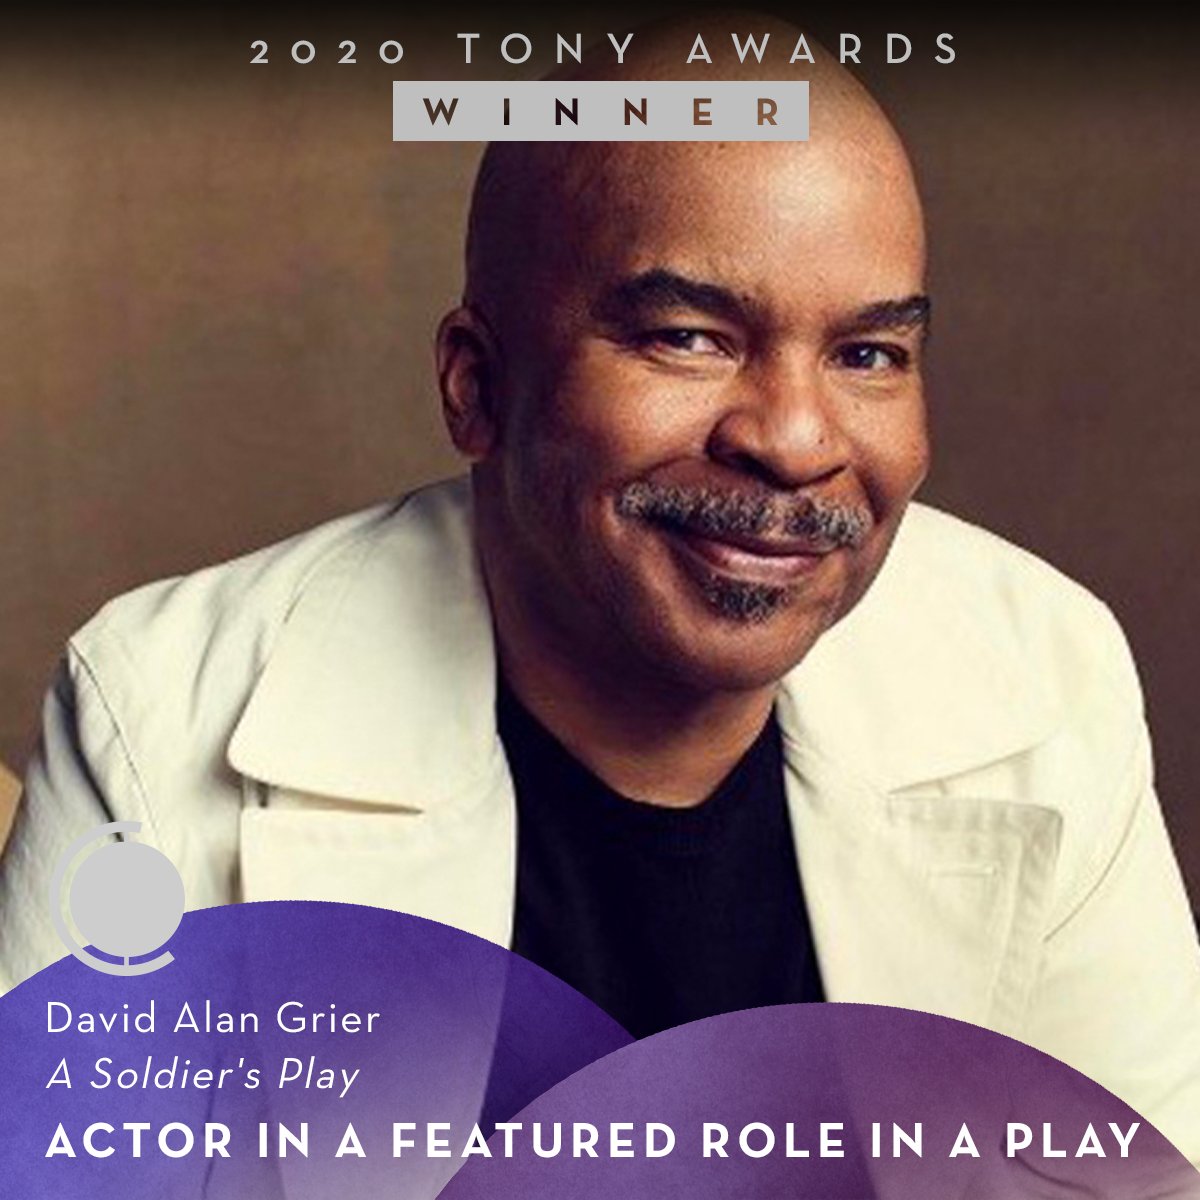 Congrats to @davidalangrier of #ASoldiersPlay, #TonyAwards-winner for Actor in a Featured Role in a Play. Bravo!